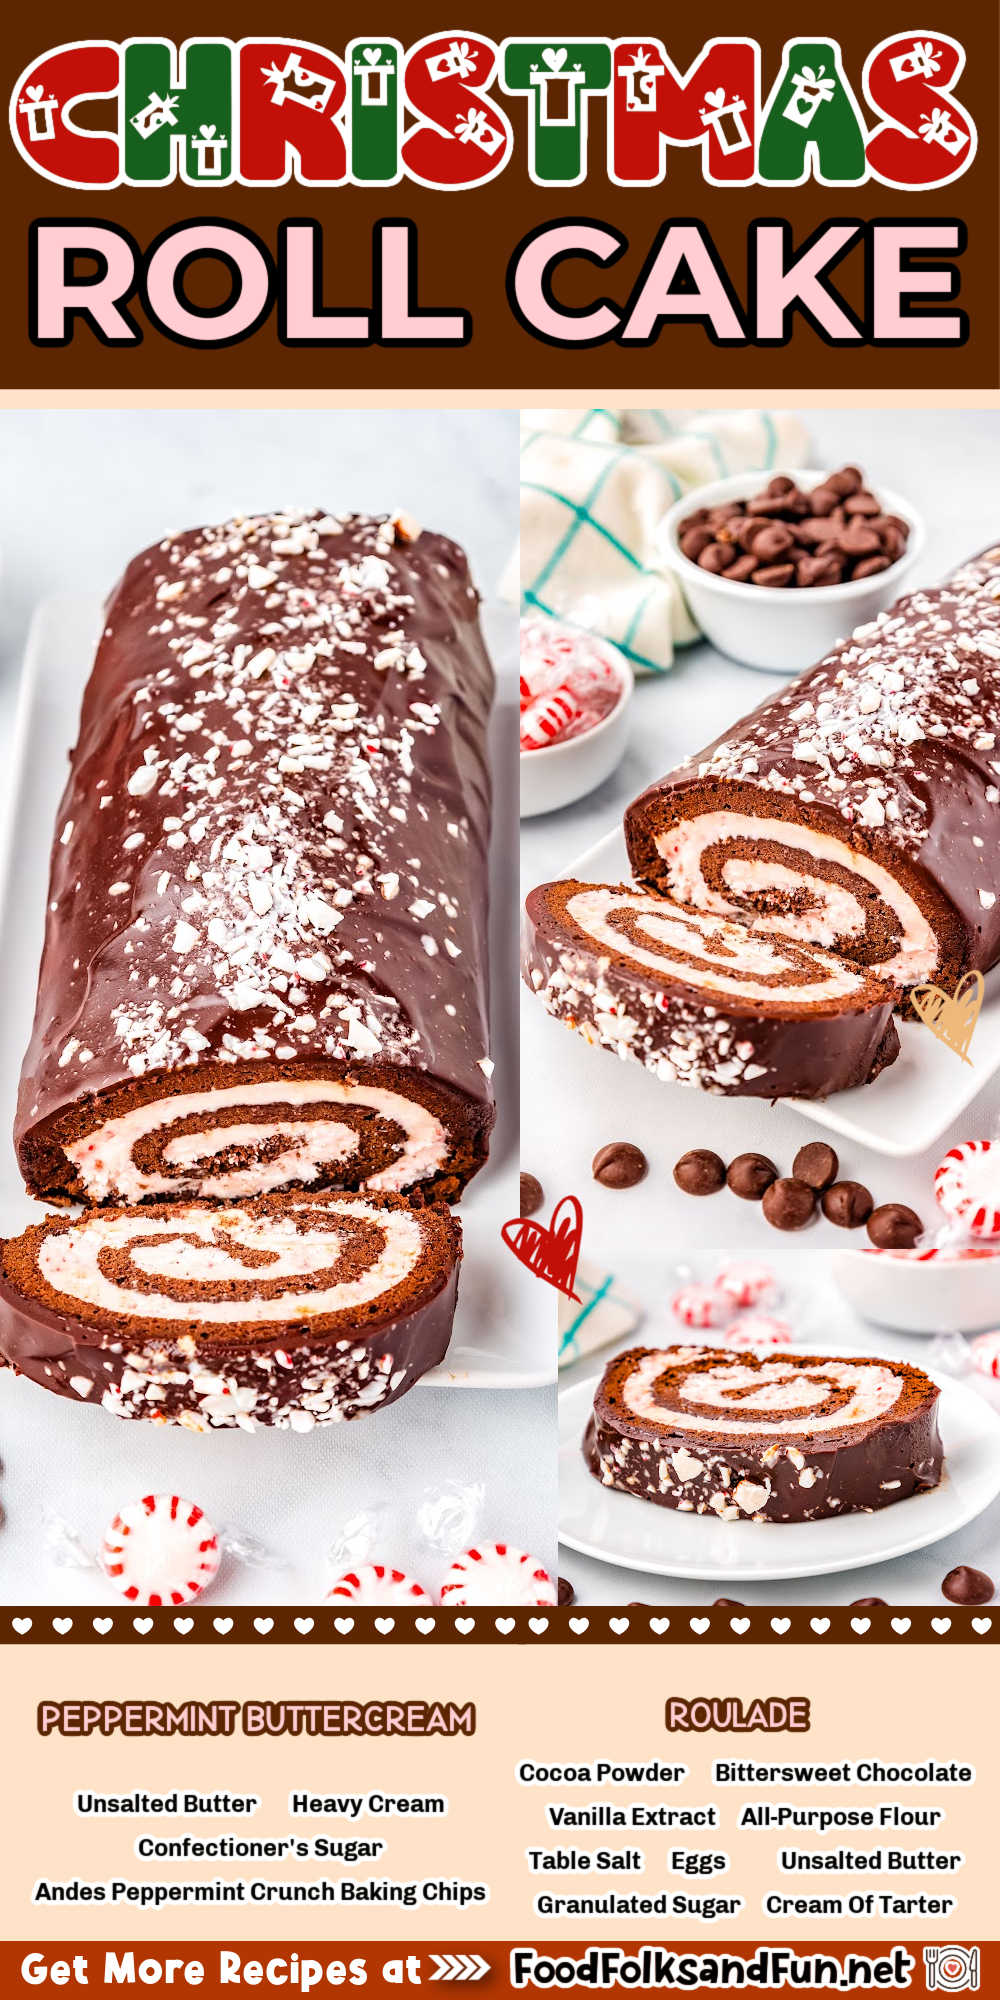 Impress Your Guests with Festive Flavor: Elevate your holiday dessert table with this Christmas Roll Cake. It's a show-stopper that combines rich chocolate layers, a refreshing peppermint filling, and a festive presentation. via @foodfolksandfun